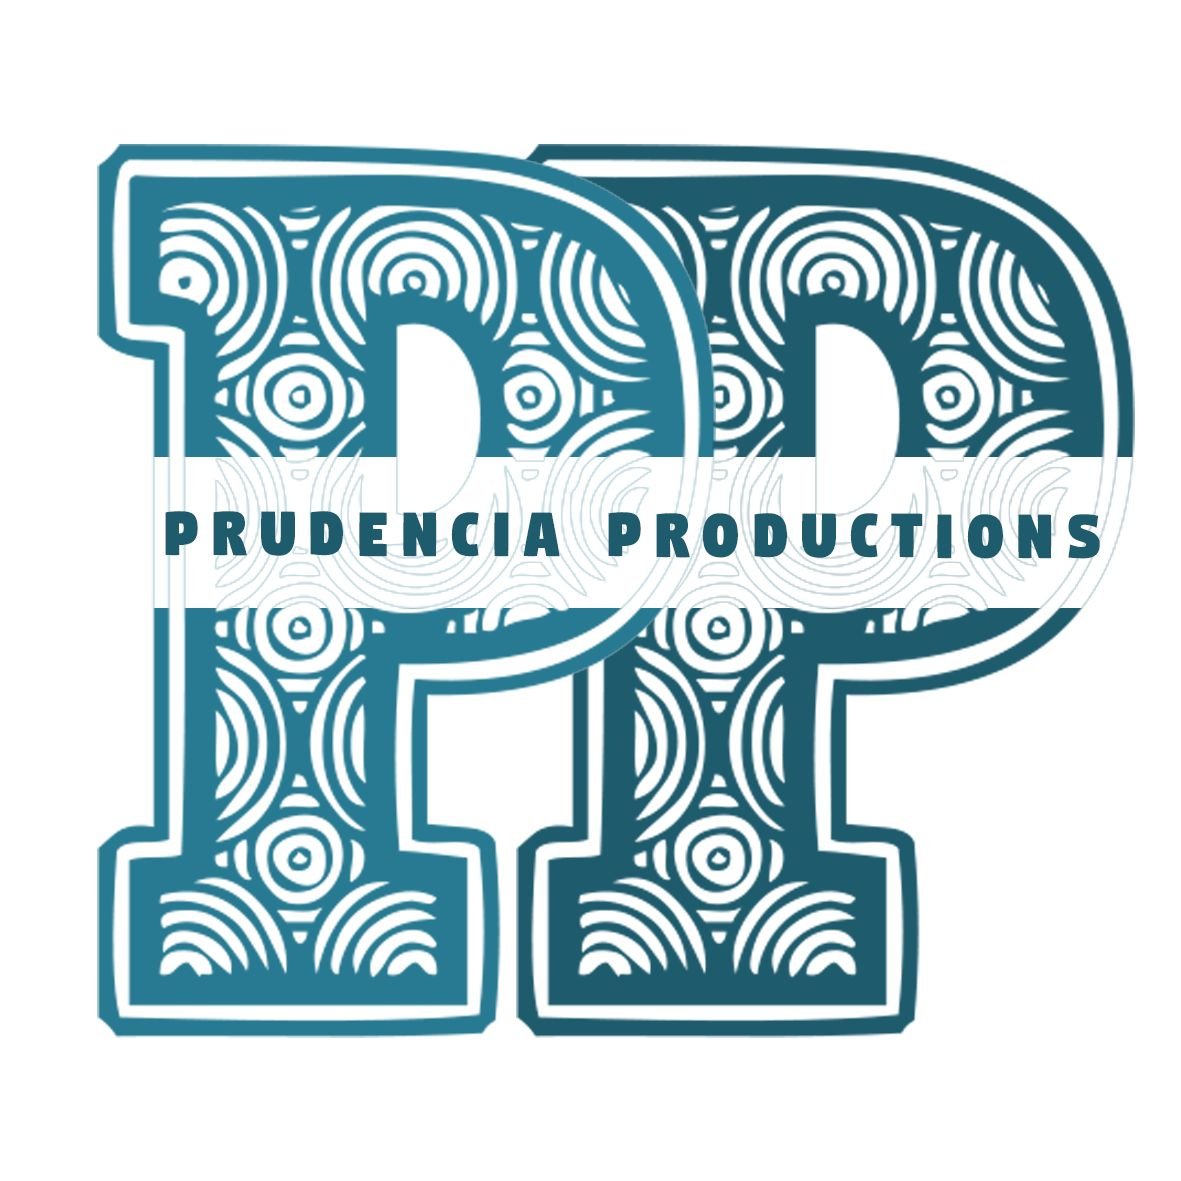 Prudencia Productions